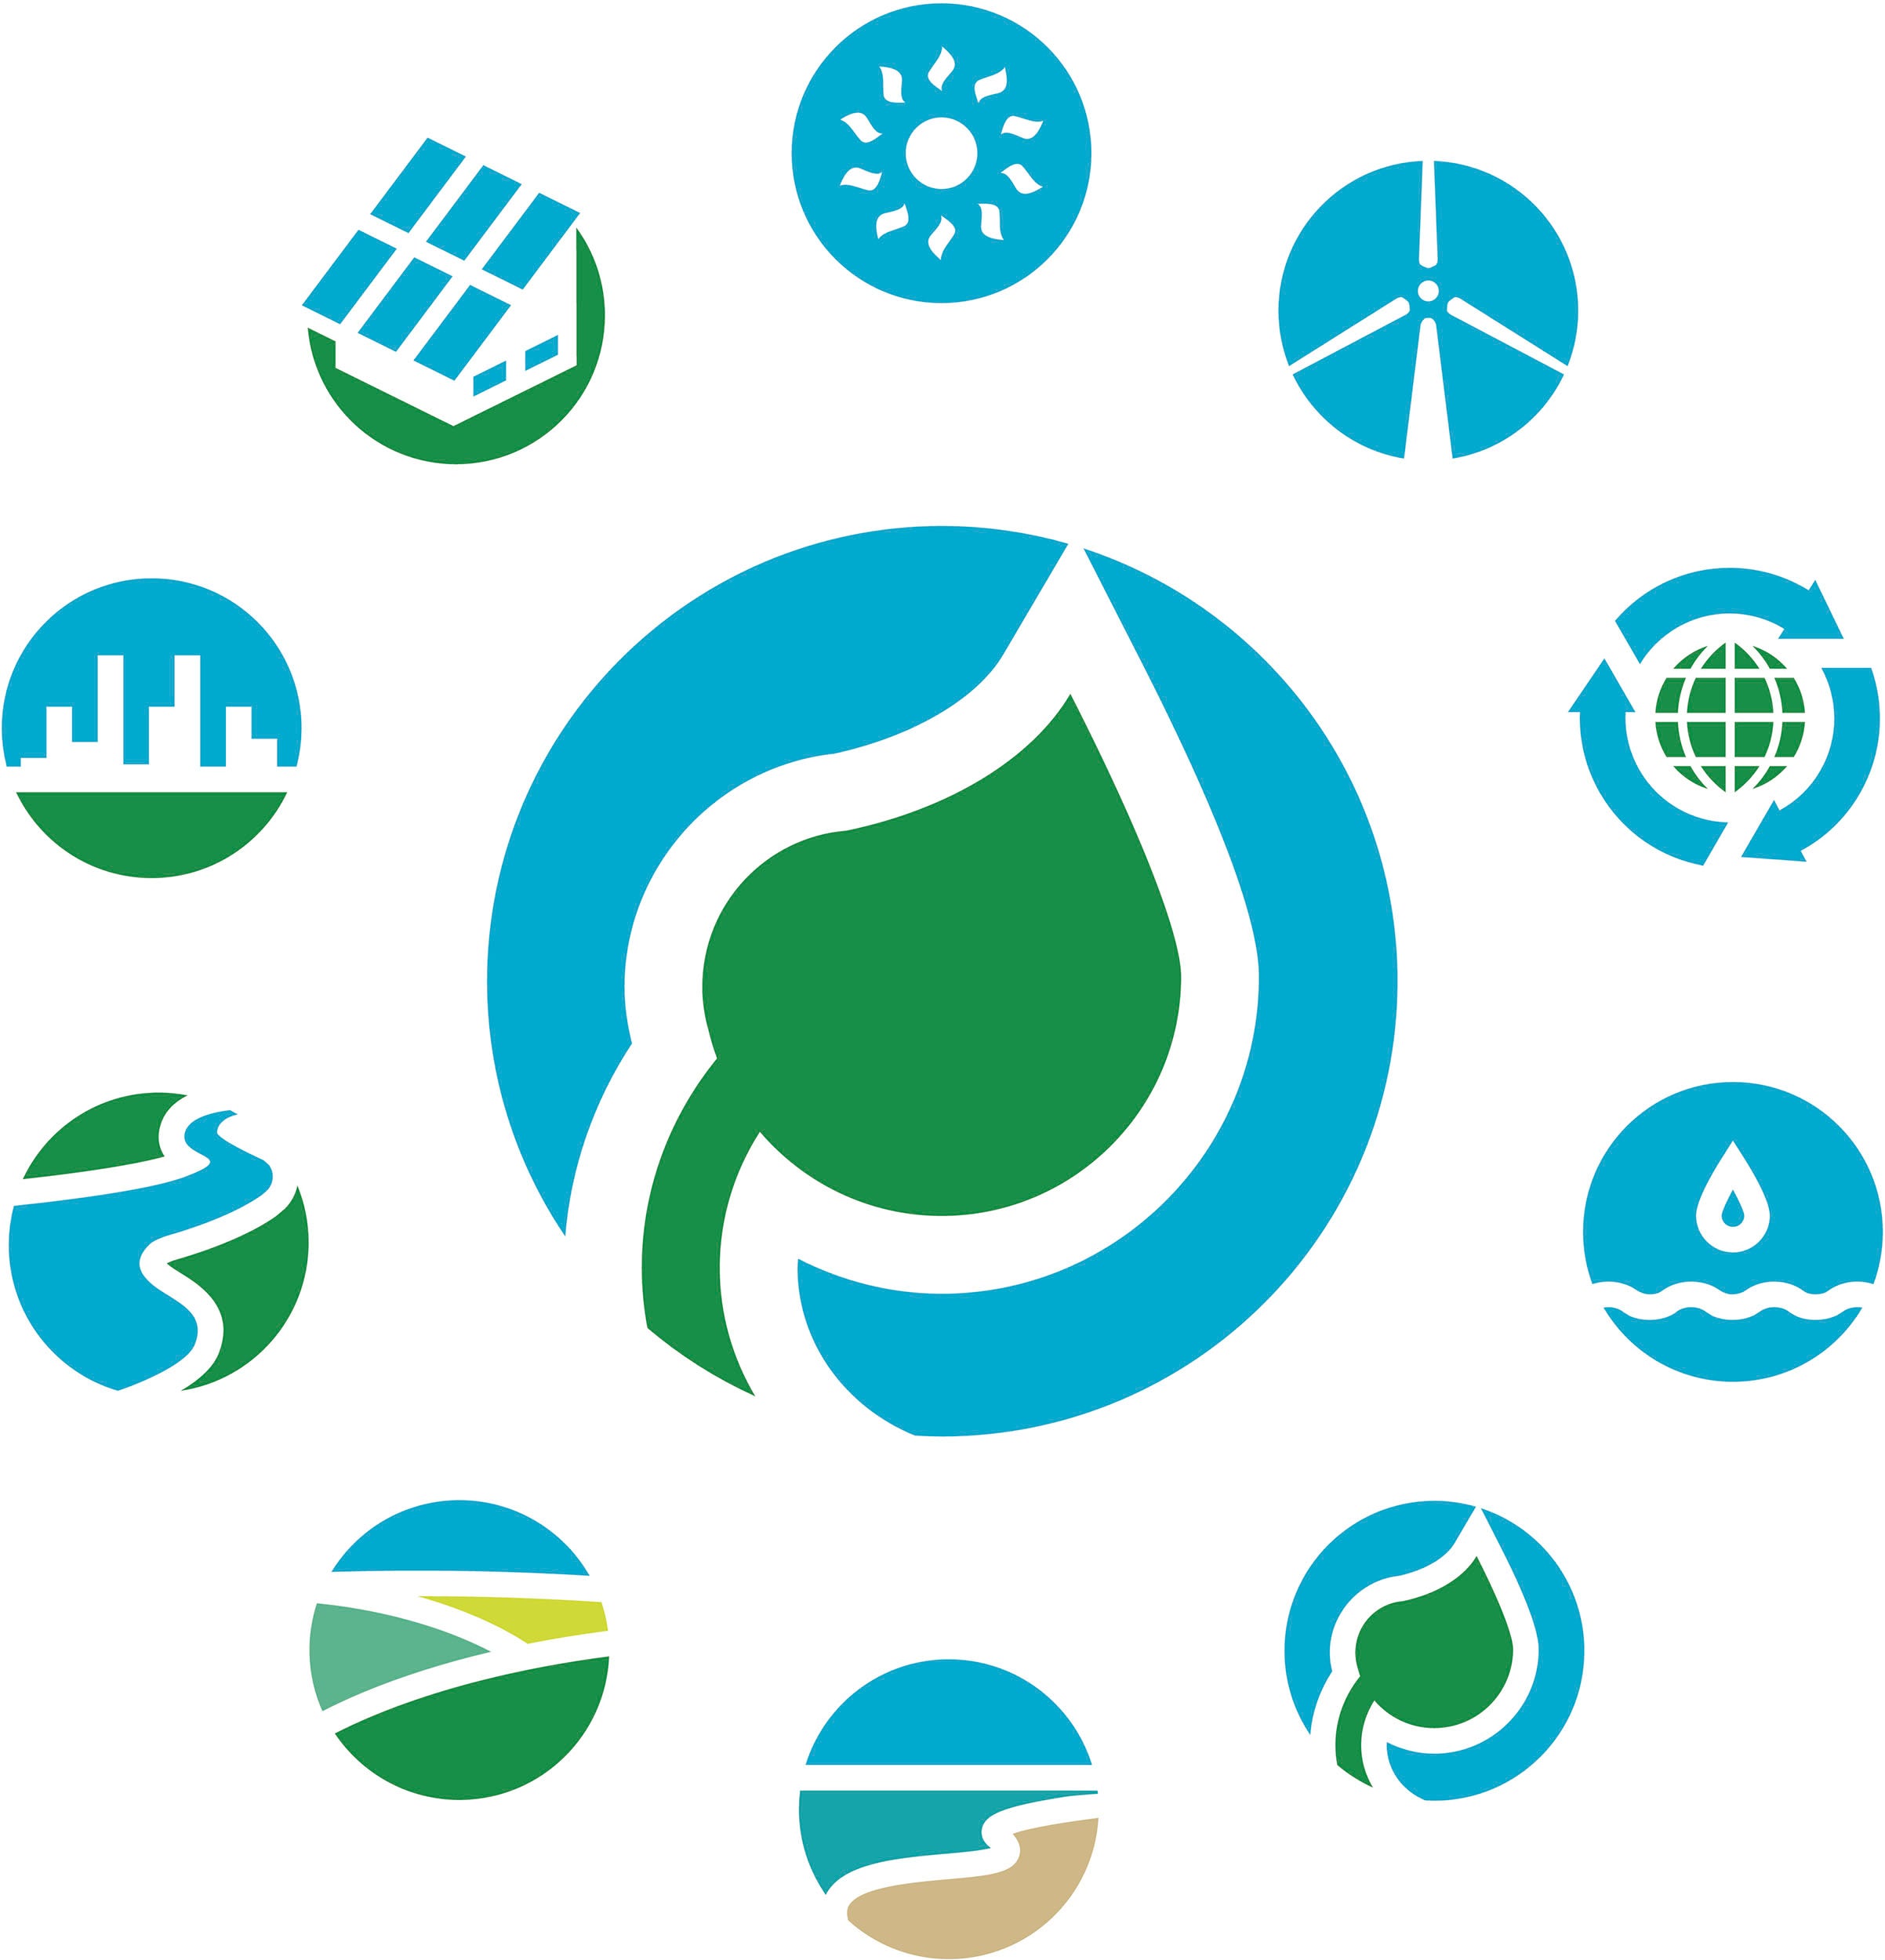 Symbols depicting energy, marine, land and water conservation.